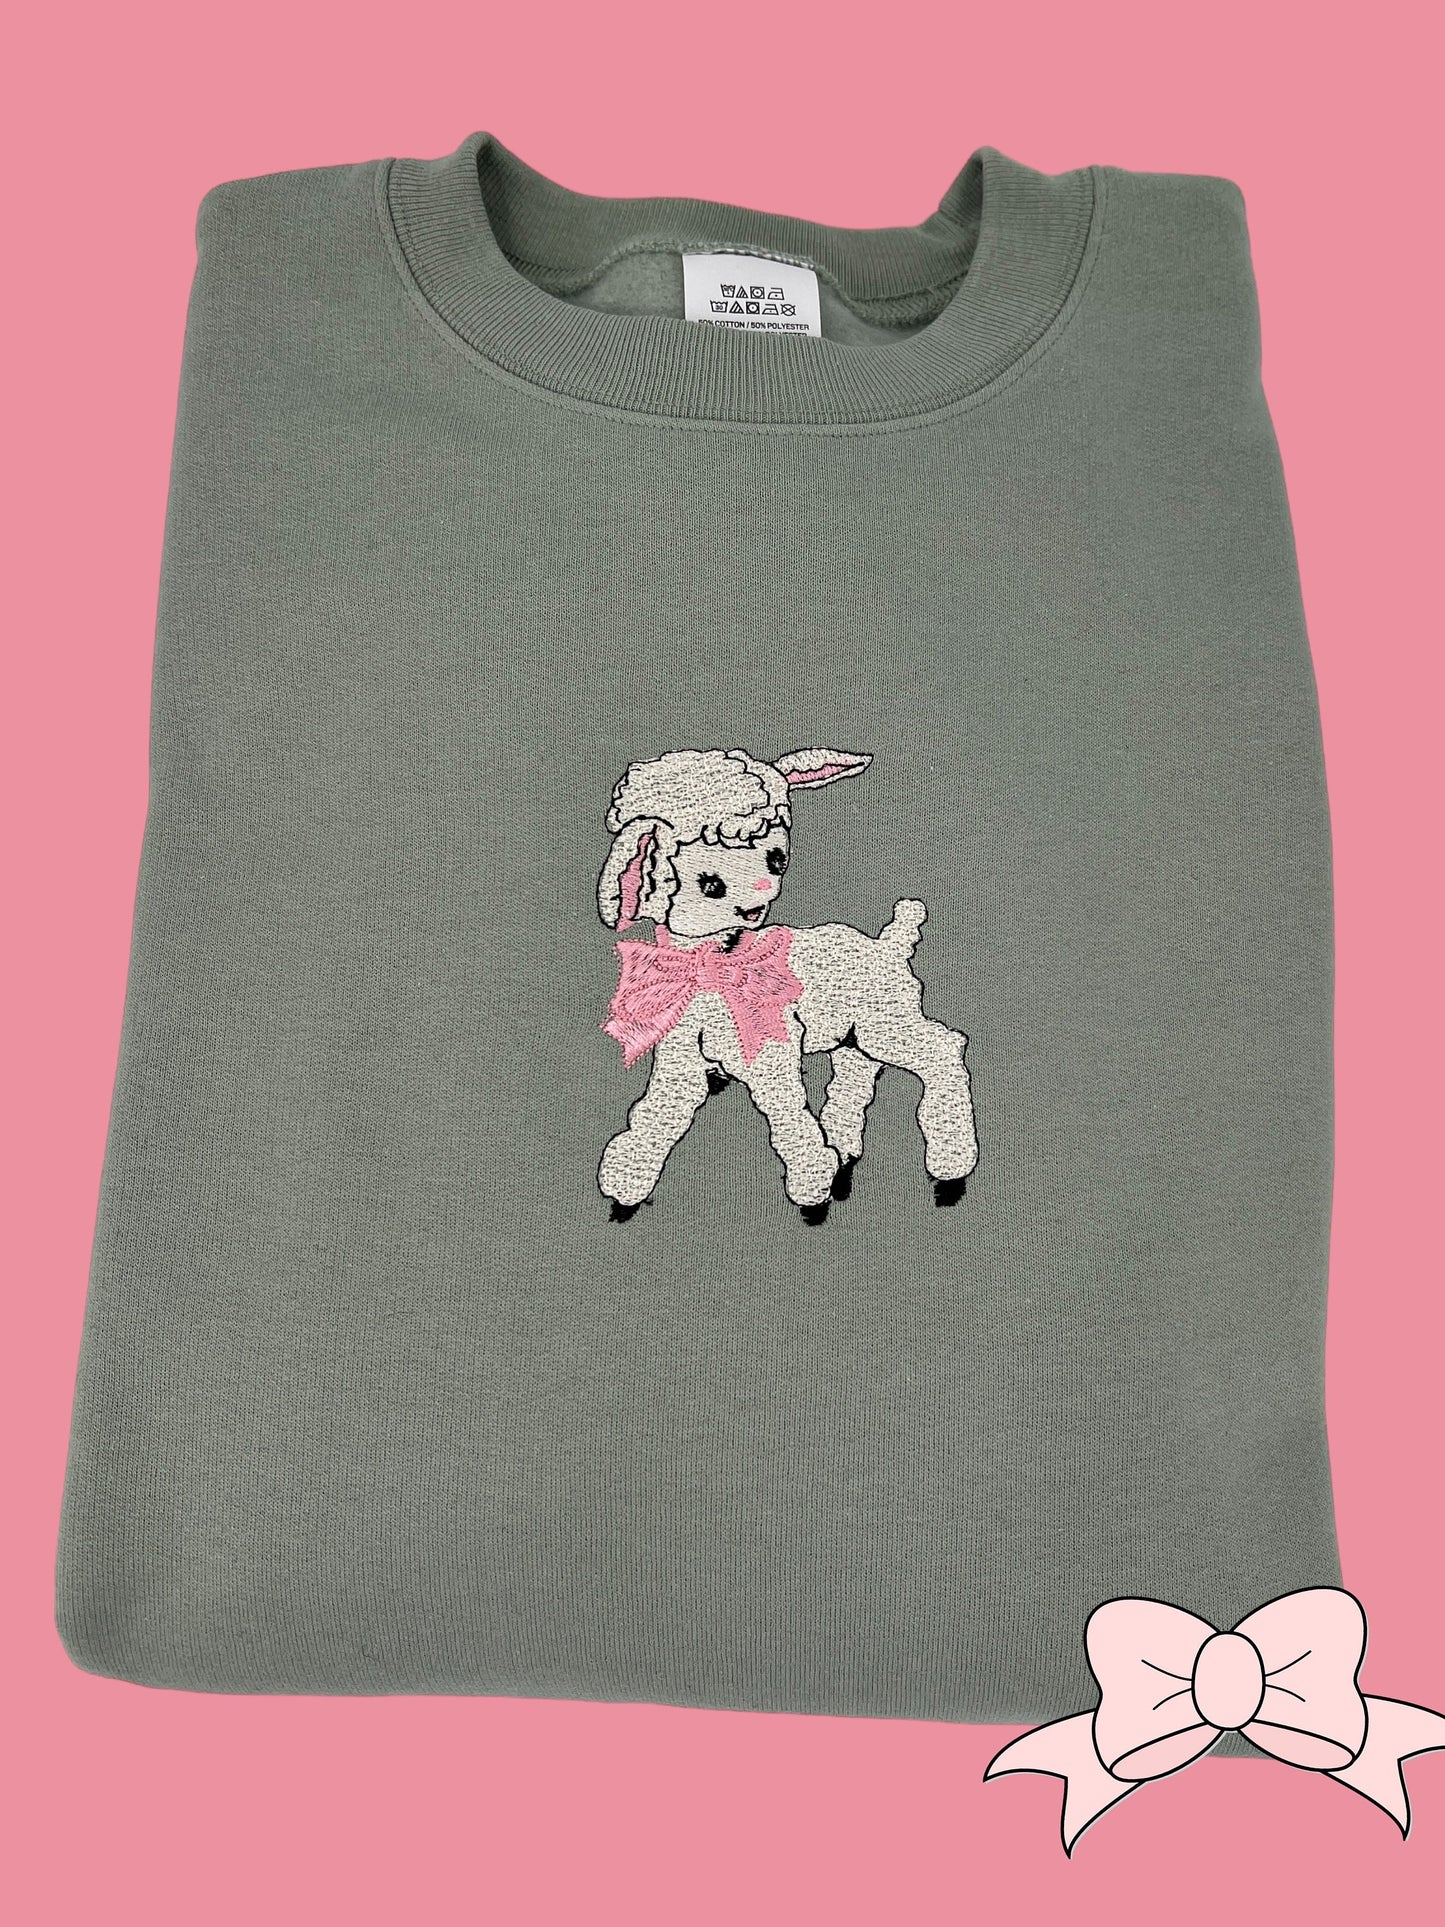 a gray shirt with a pink bow on it